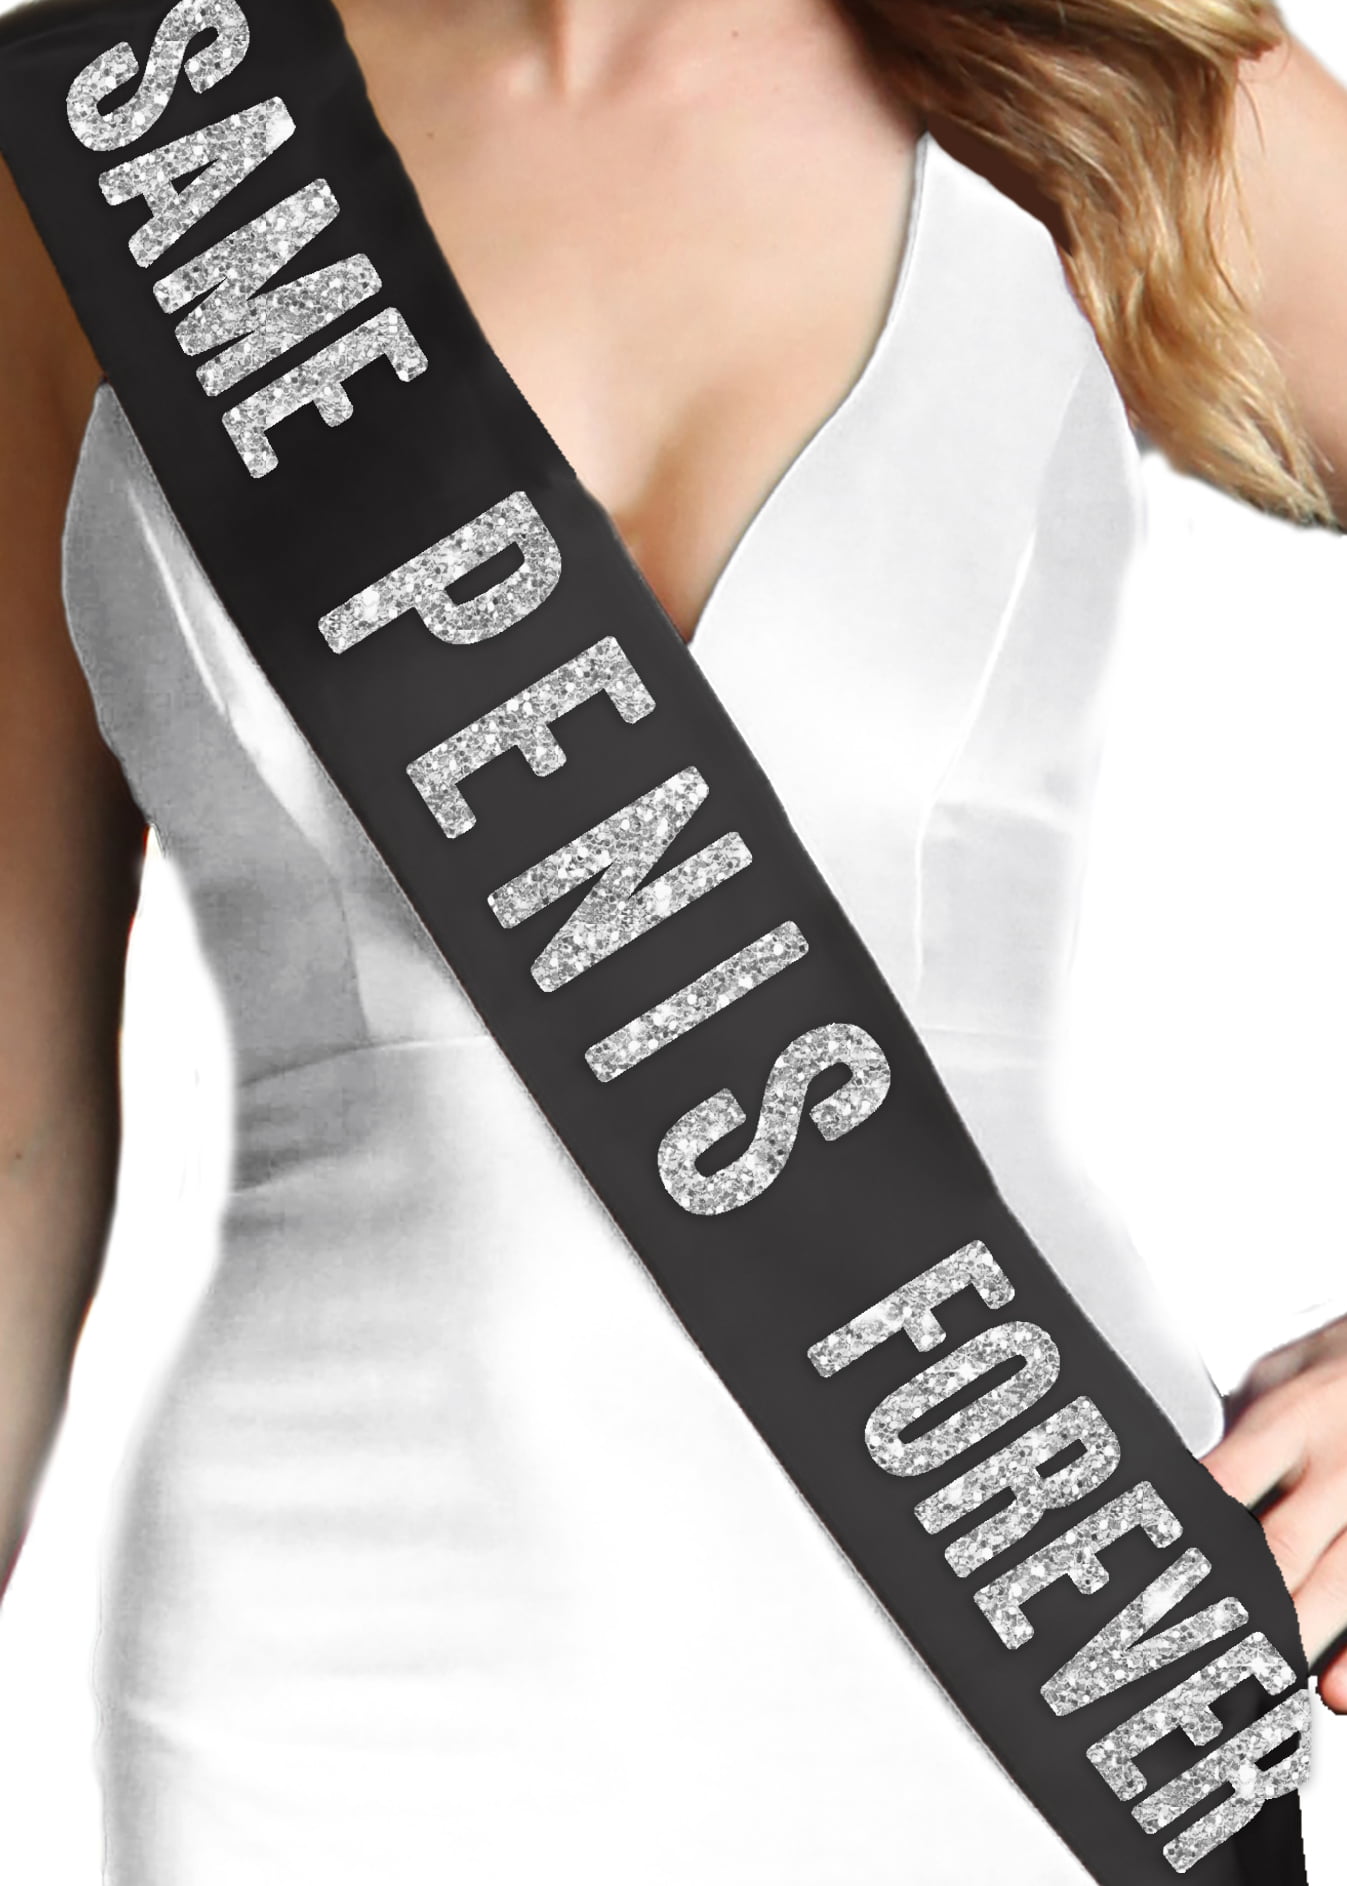 SonaGear Custom Sashes for Women - Perfect for Birthdays, Pageants,  Bachelorette Parties, Baby Showers, and More - Satin Finish, Sweet 16,  Bride, Just